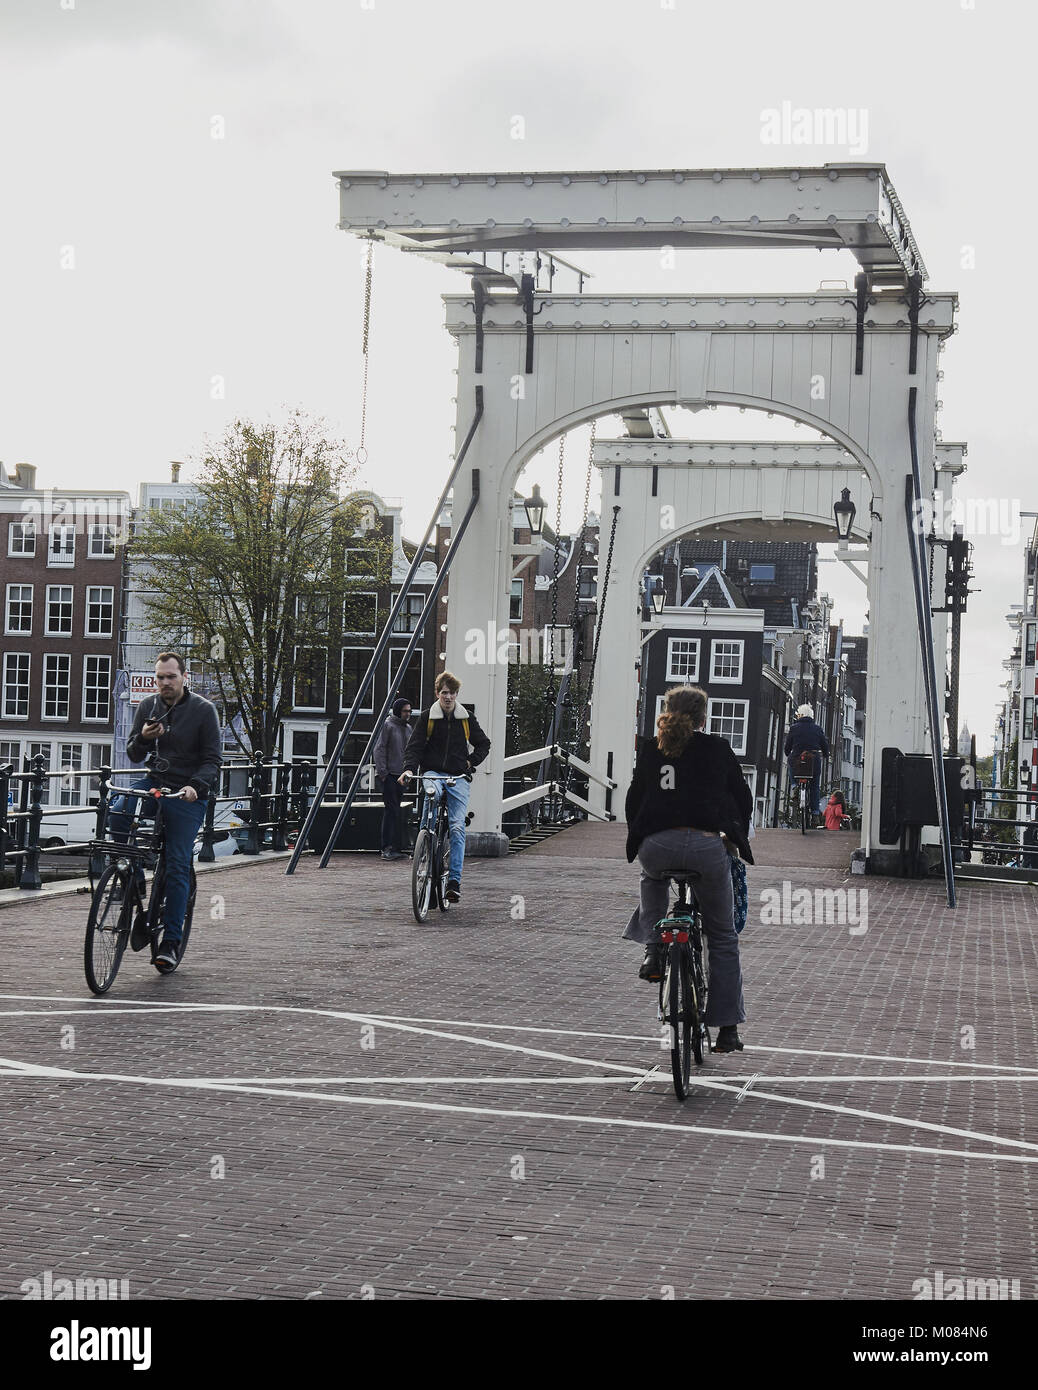 Magere Brug (skinny bridge) a pedestrian and bicycle bascule bridge across the Amstel river, Amsterdam, Netherlands Stock Photo